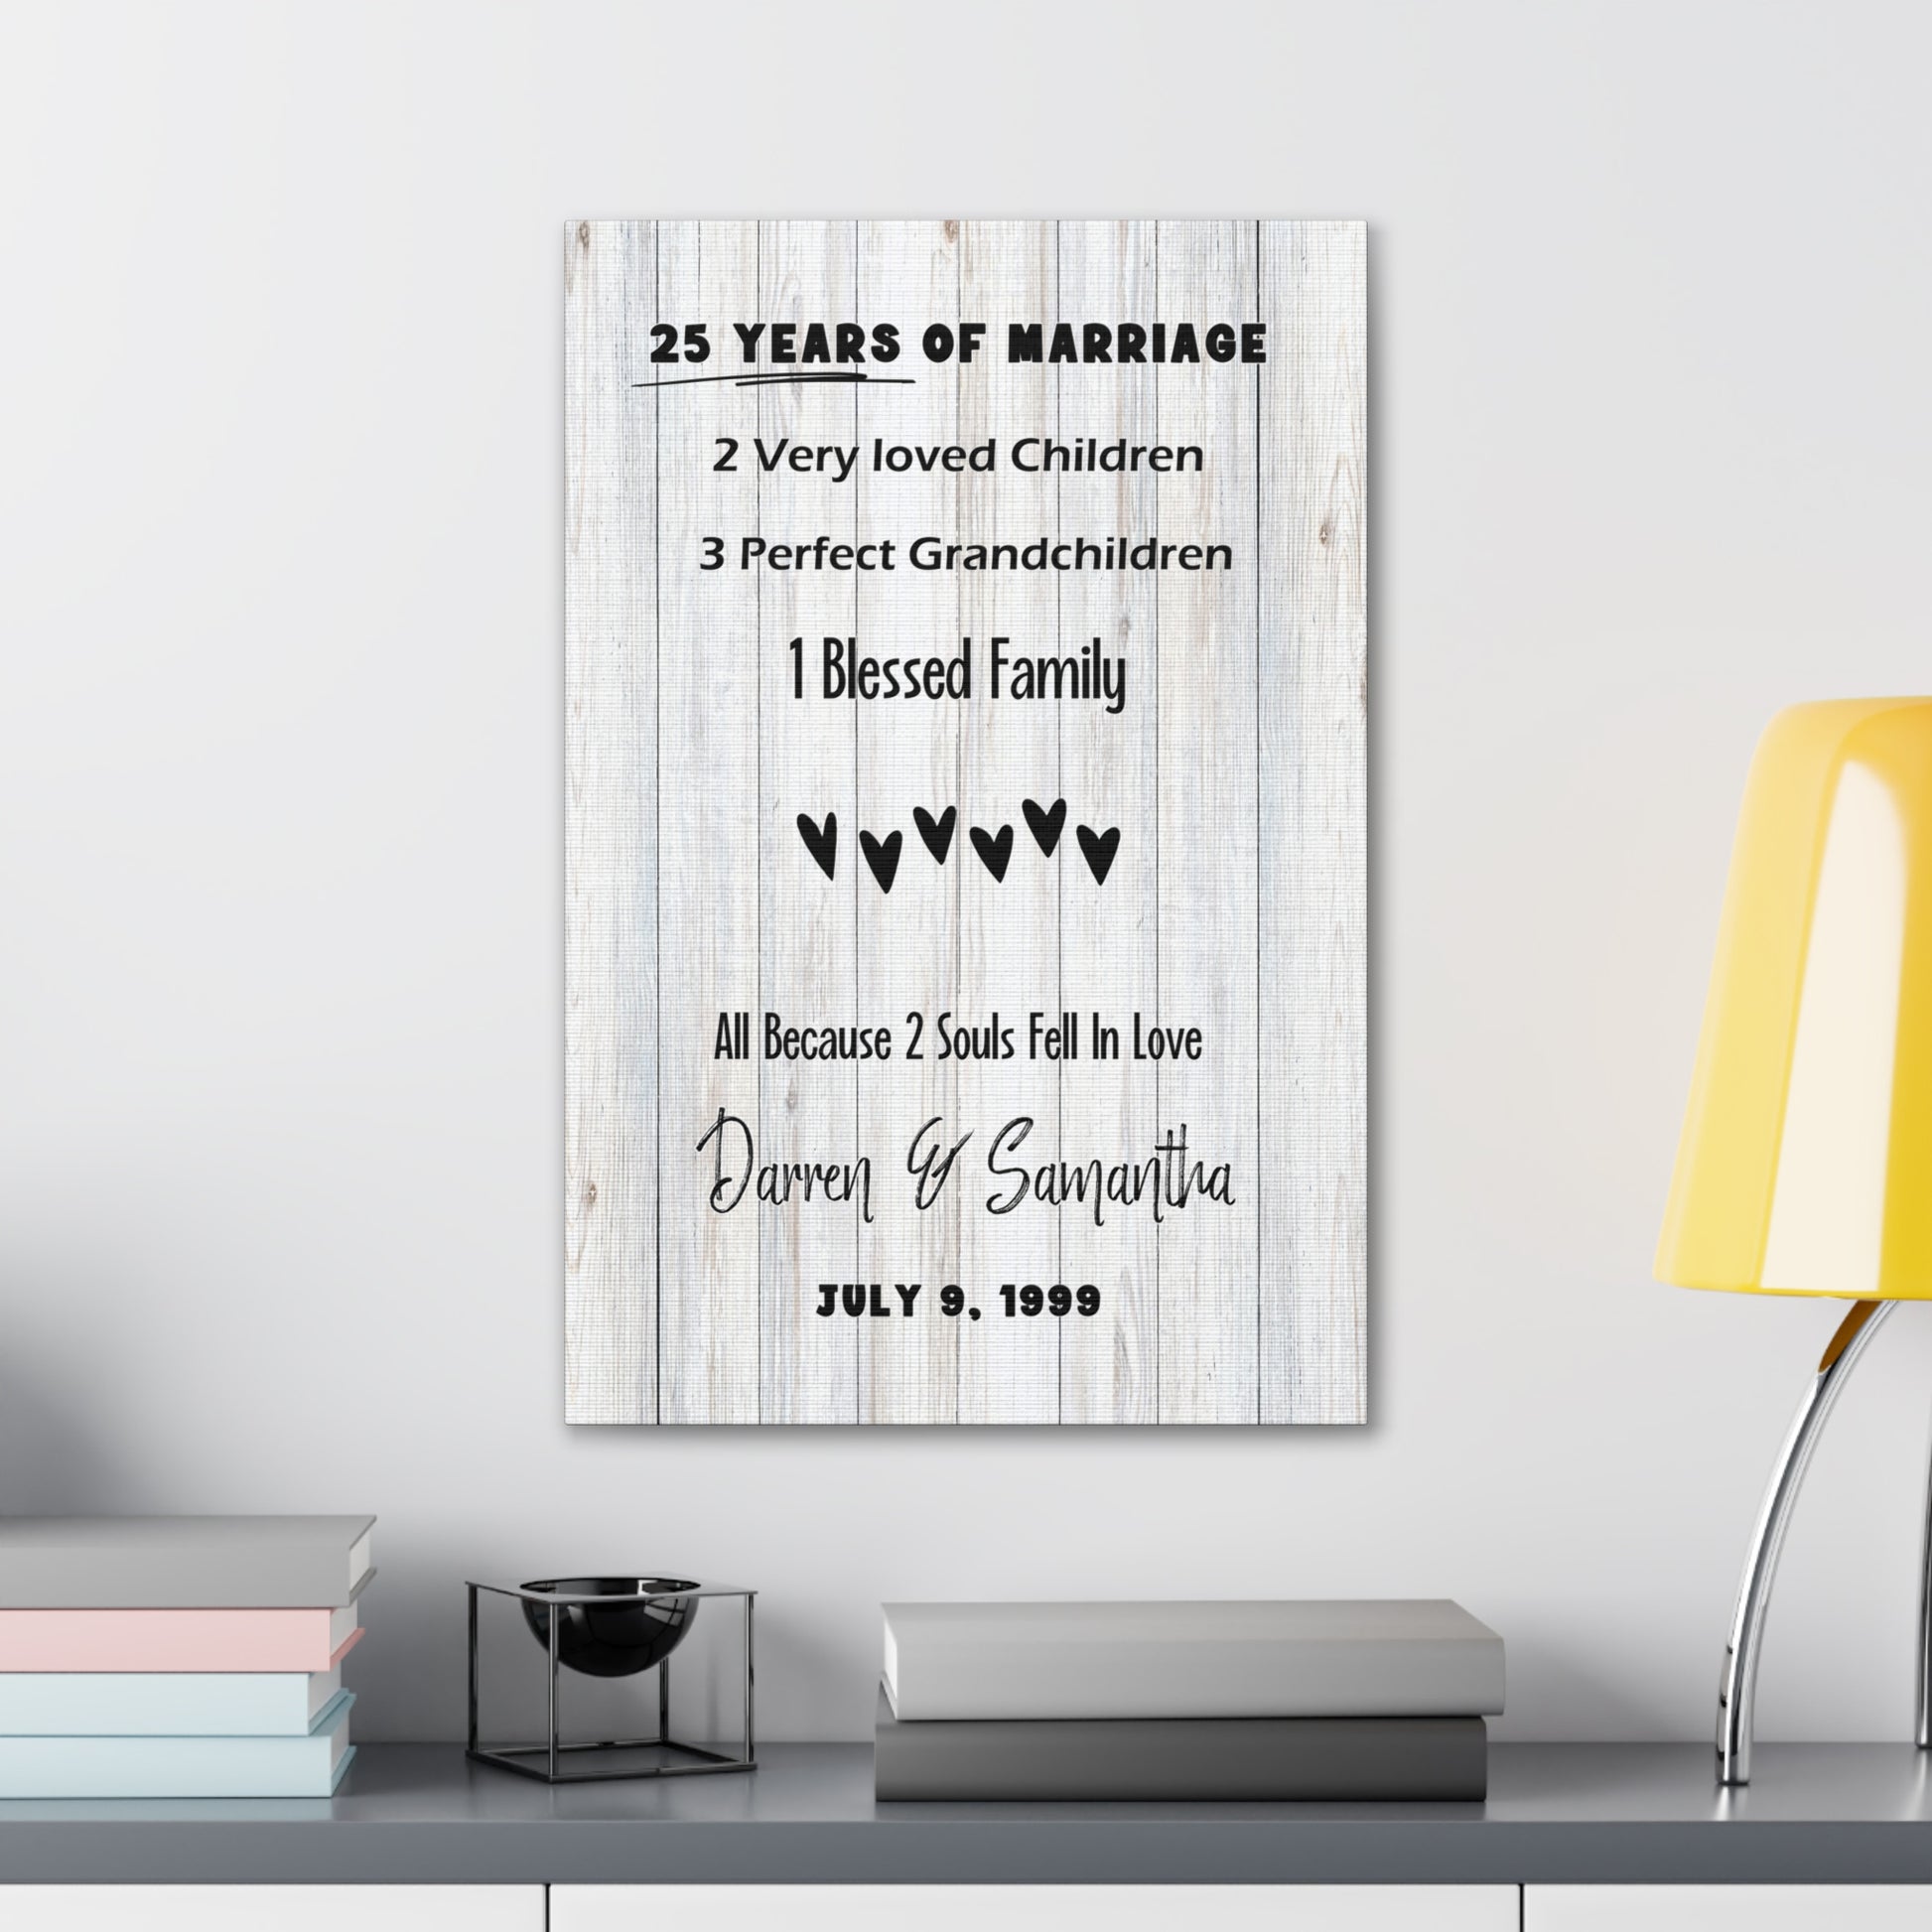 "1 Blessed Family" Custom Wall Art - Weave Got Gifts - Unique Gifts You Won’t Find Anywhere Else!